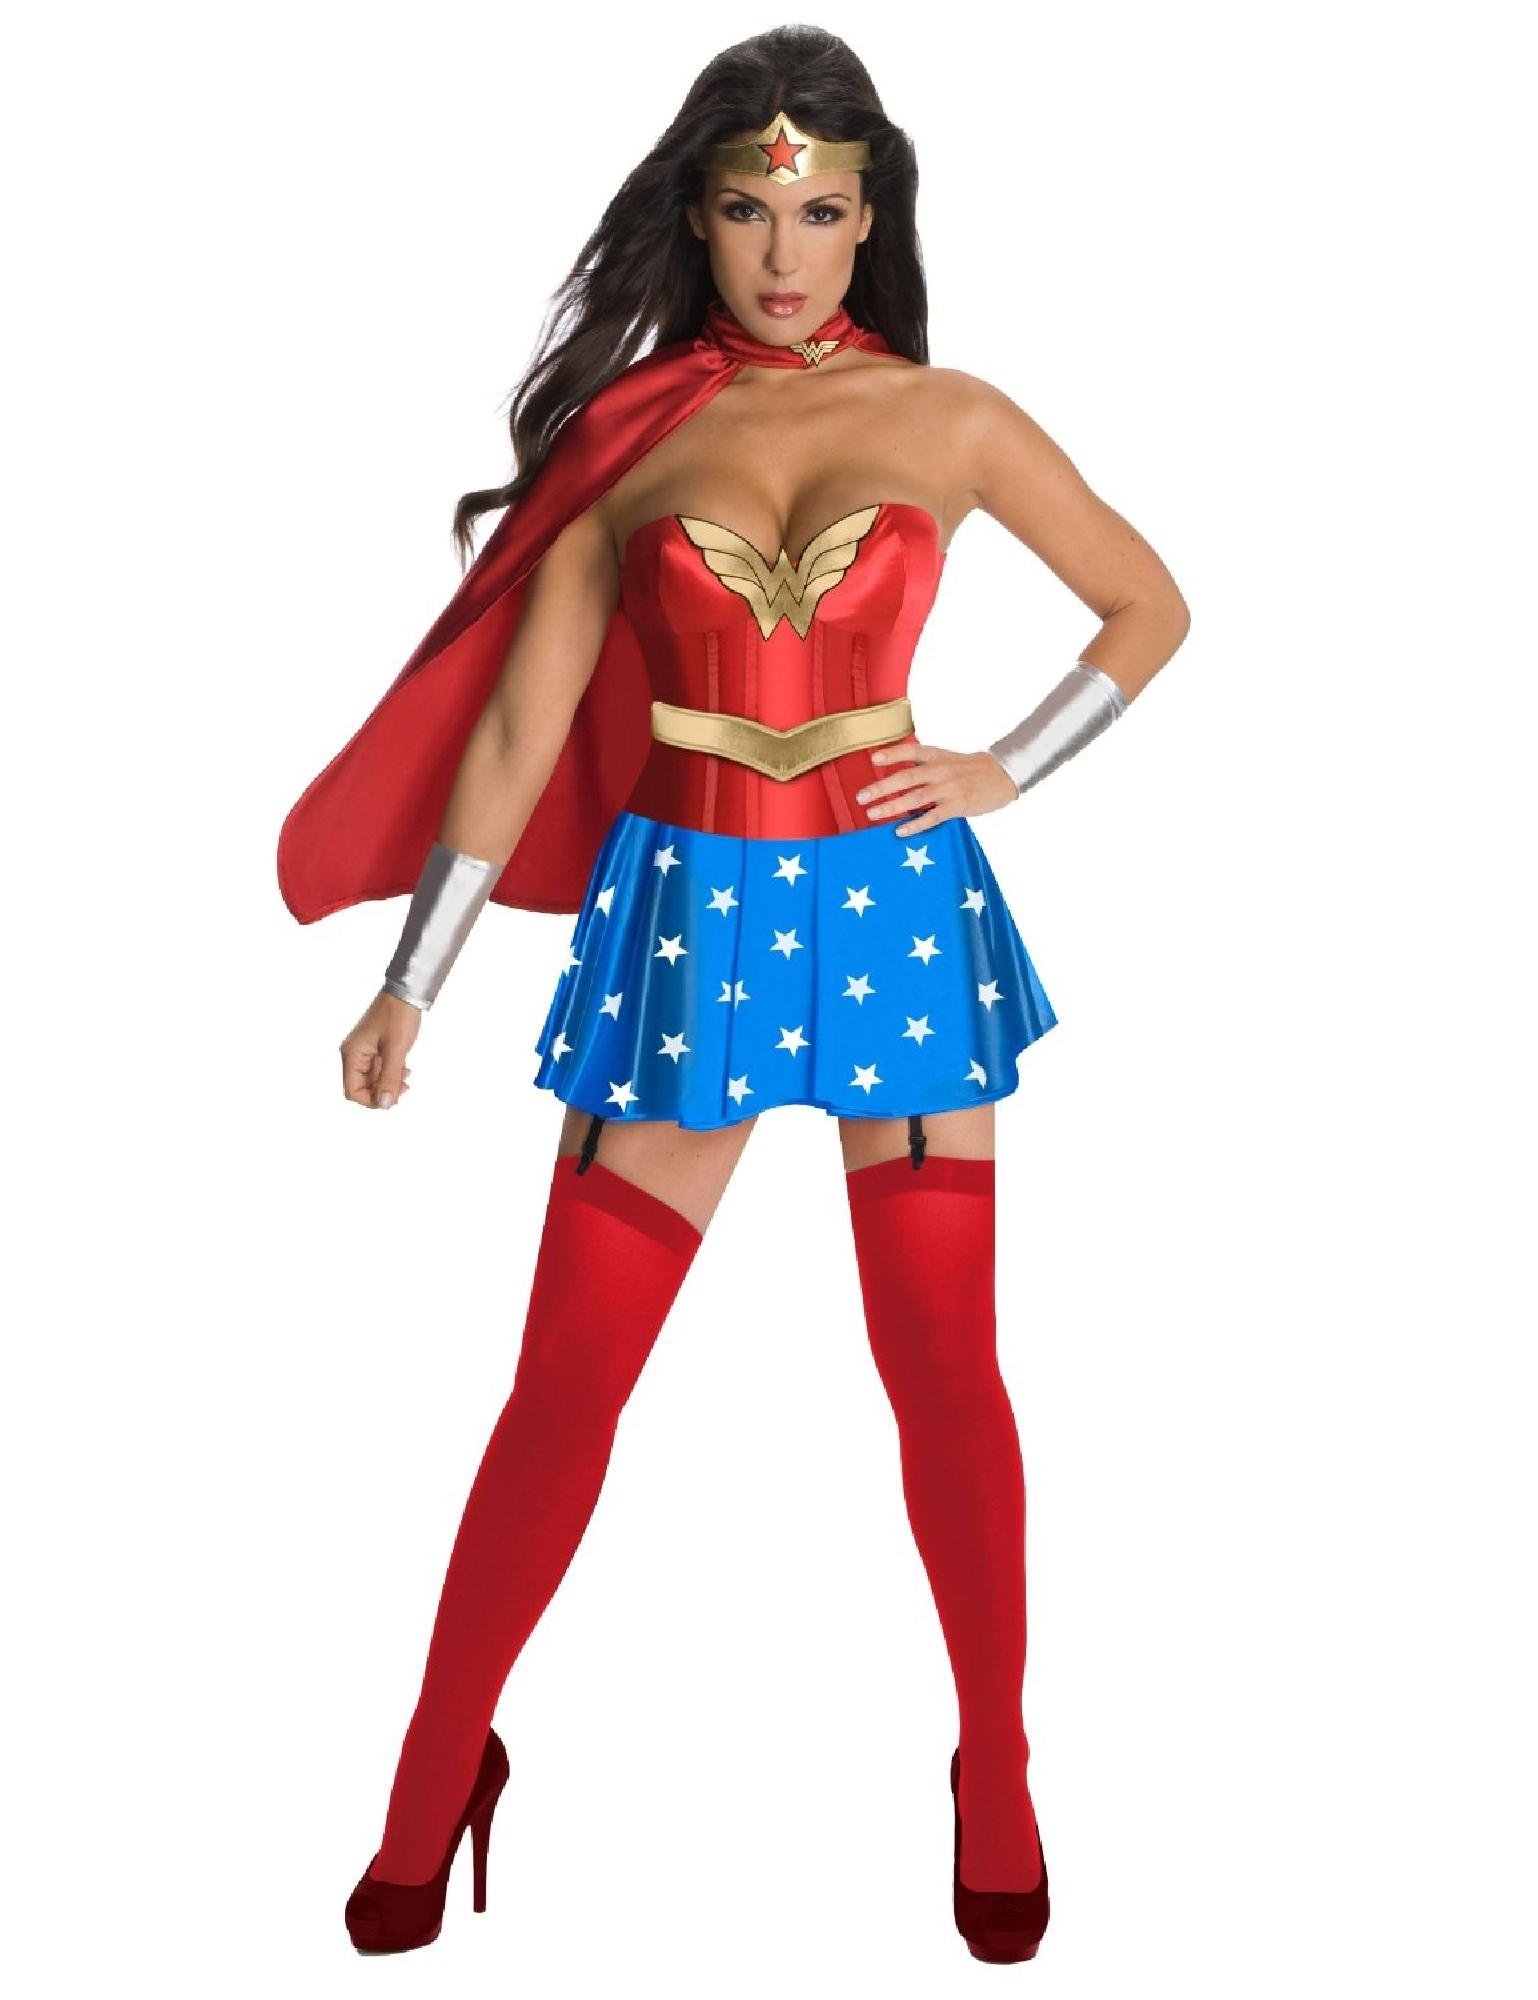 10 Lovable Around The World Costume Ideas superhero costume ideas saving the world one halloween at a time 2022